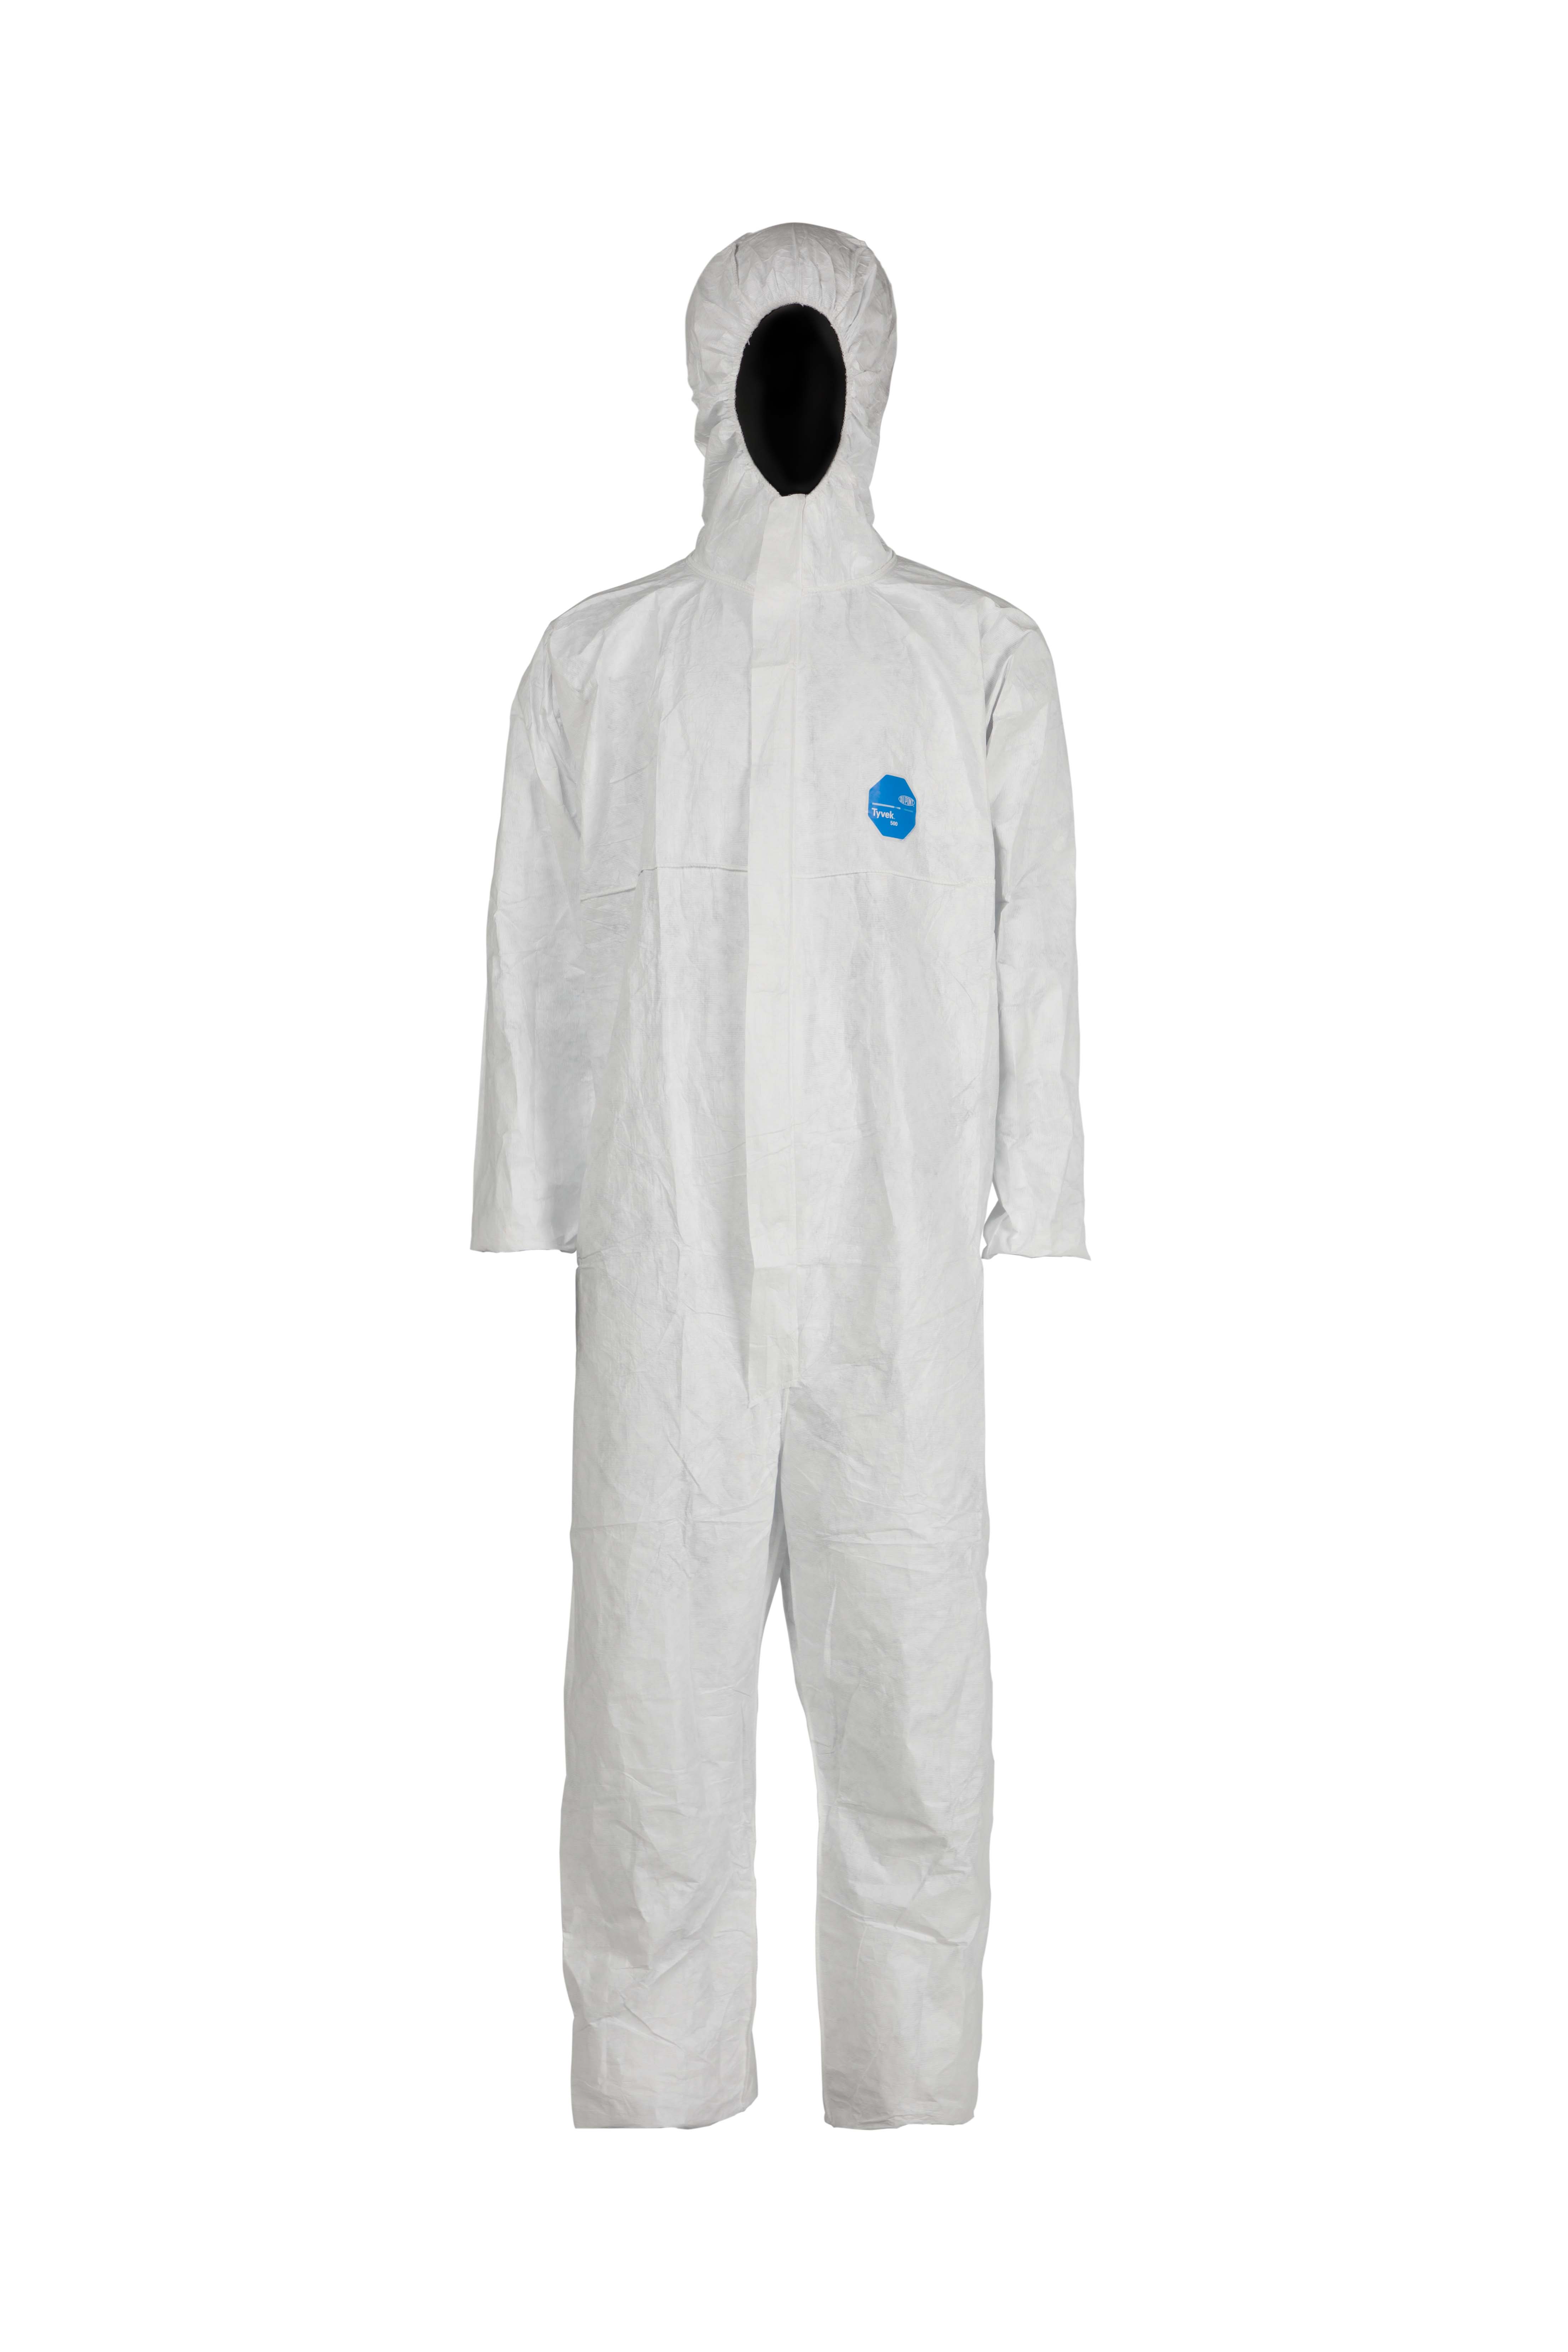 DuPont Tyvek 500 Xpert Hooded Coverall for sale online Size XL D14663986 